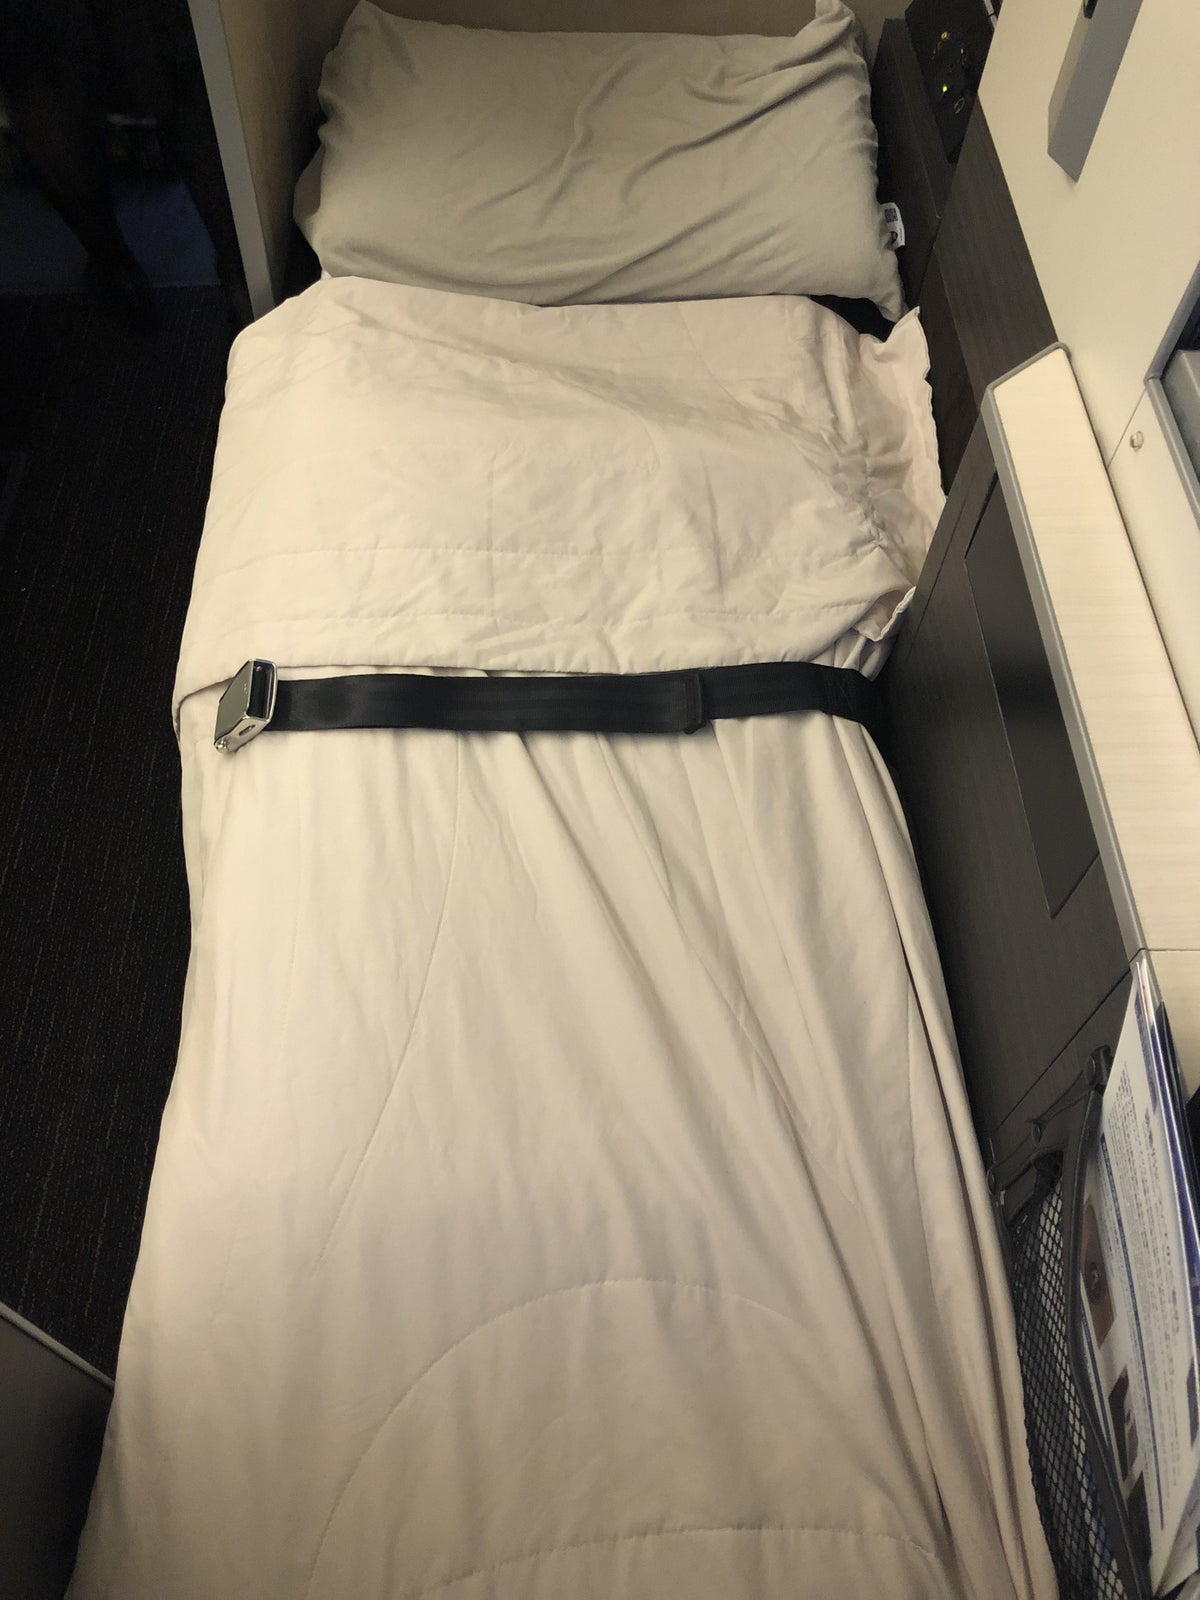 Japan Airlines 777 Business Class Bed